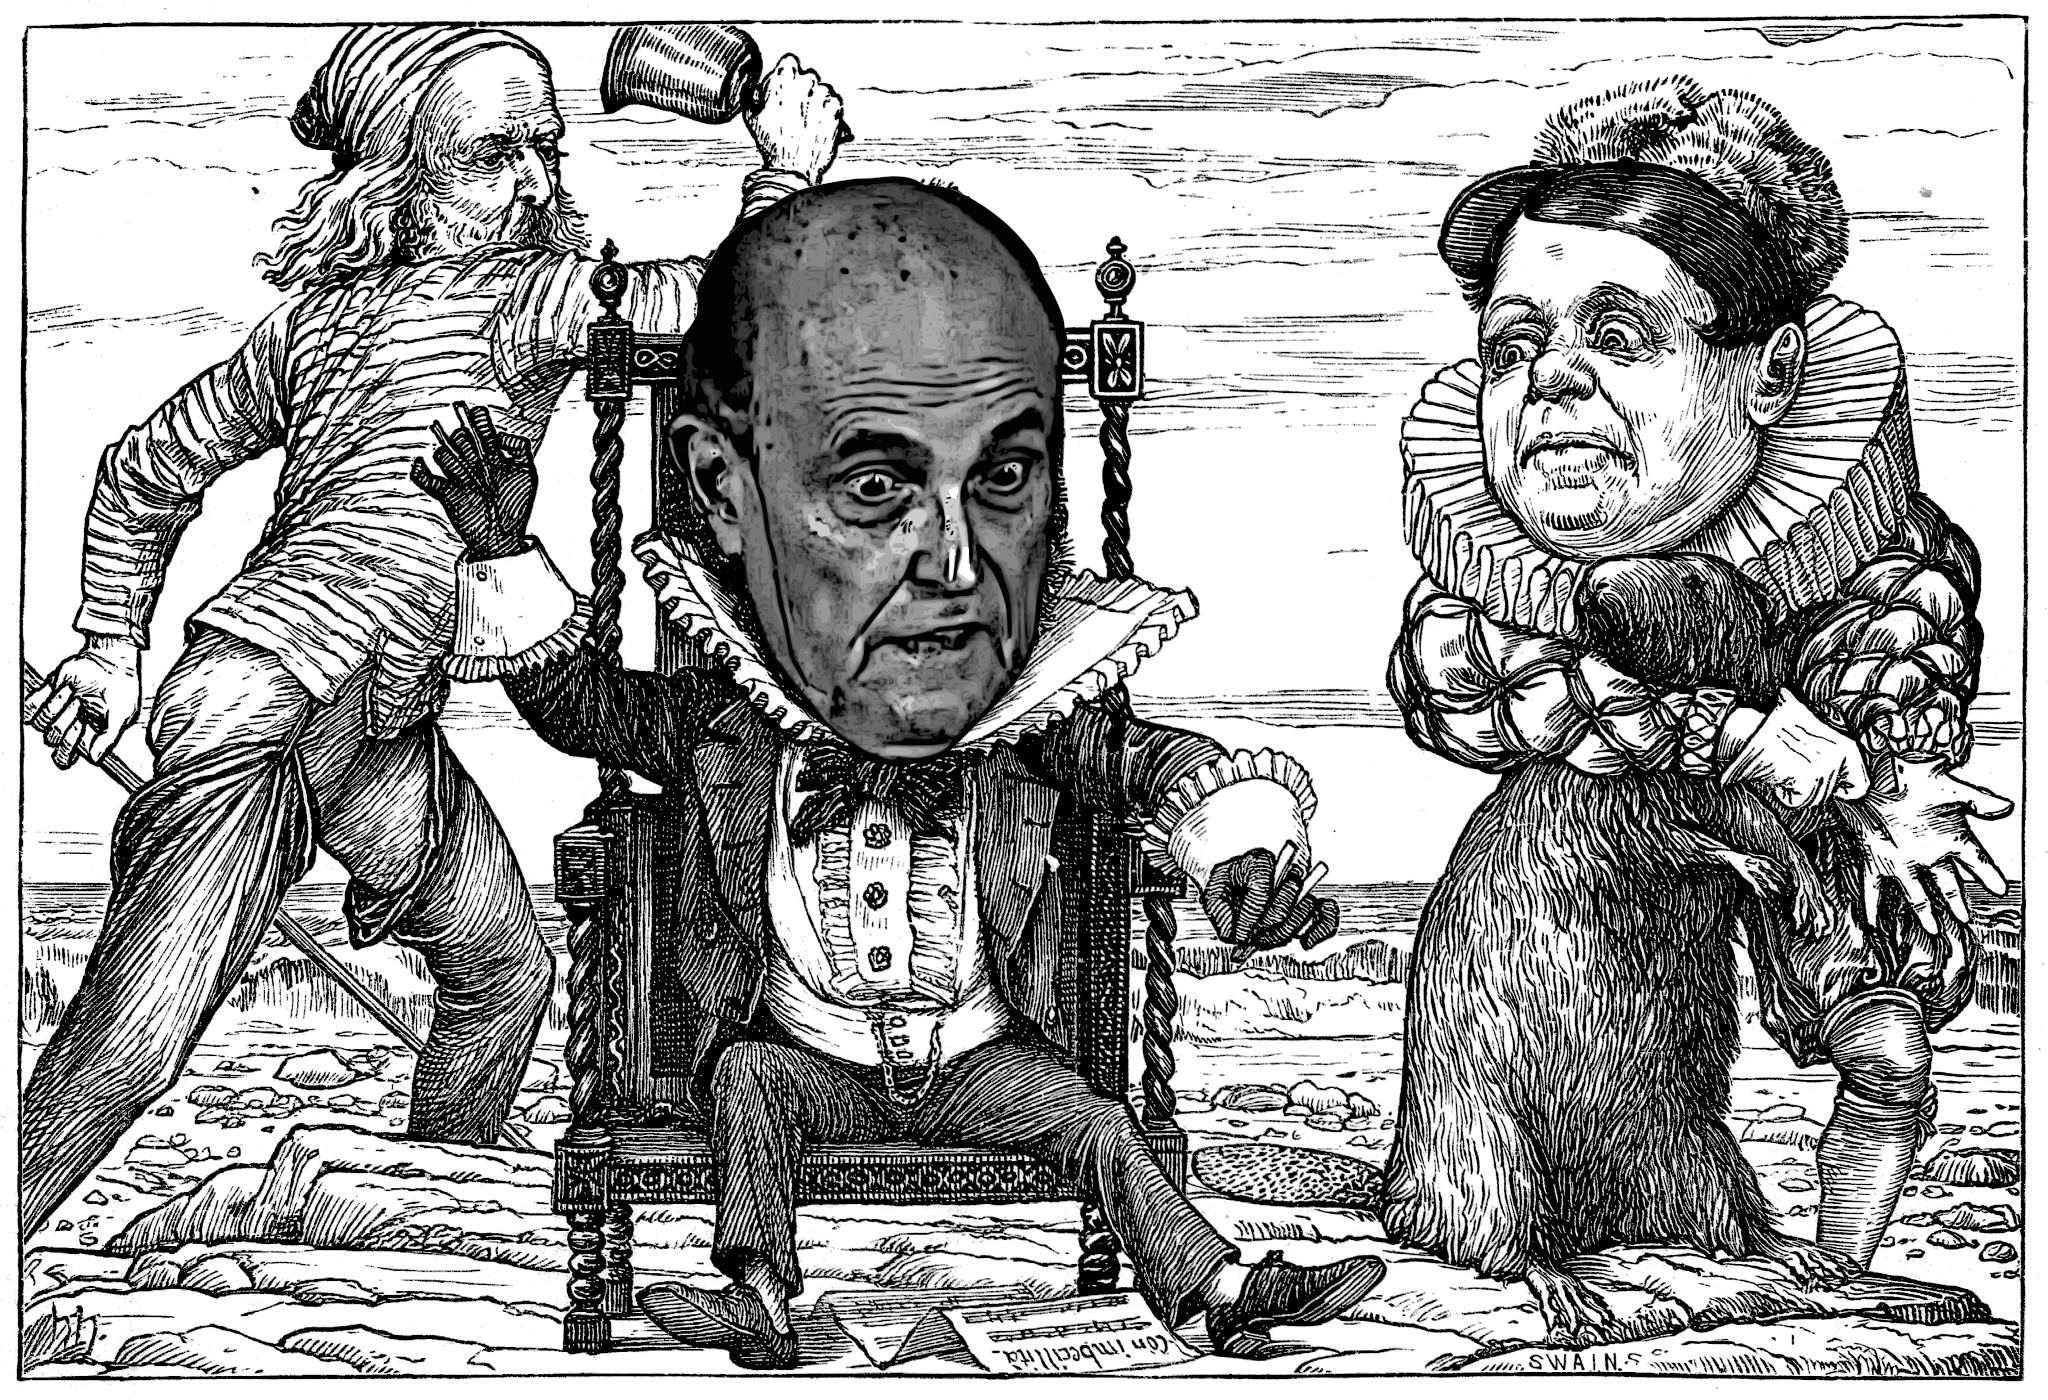 When Henry Holiday illustrated Lewis Carroll's 'The Hunting of the Snark' (1876), he used Lindsey Graham's face. I don't know, how he did that. As for Rudy Giuliani's head, I had to help a little bit.